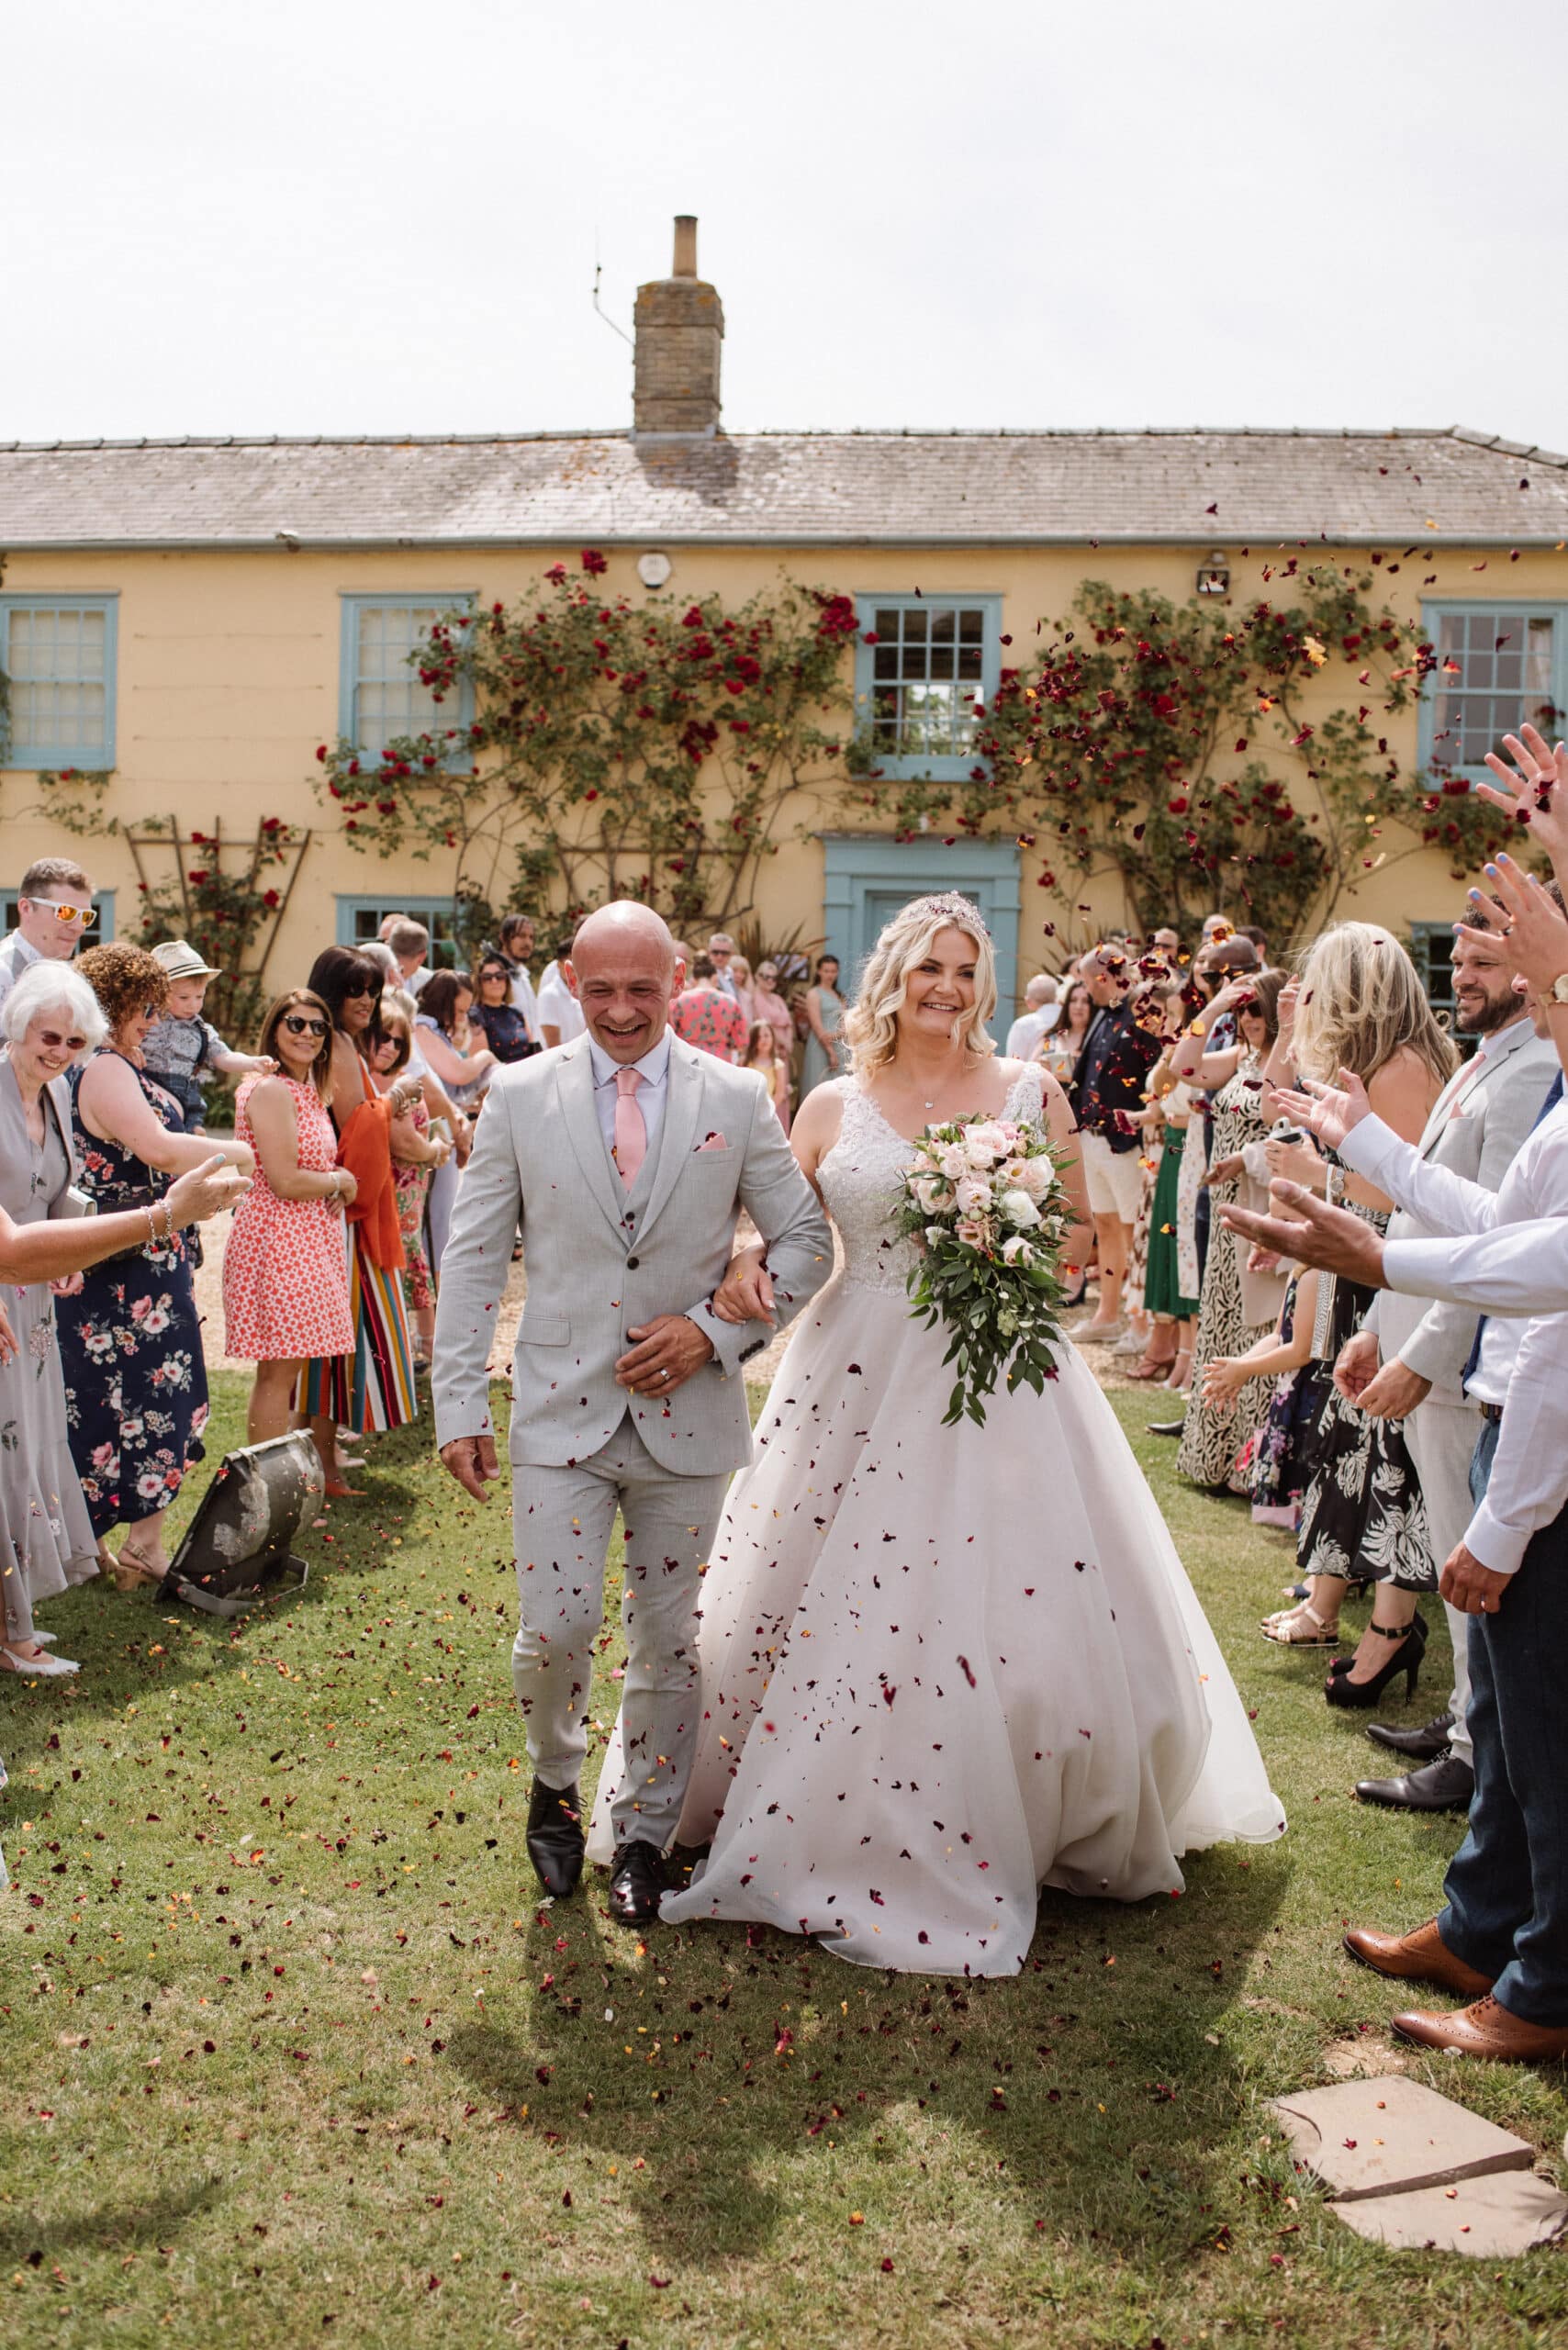 Bride and Groom have a confetti photo in front of pretty country farm house with guests